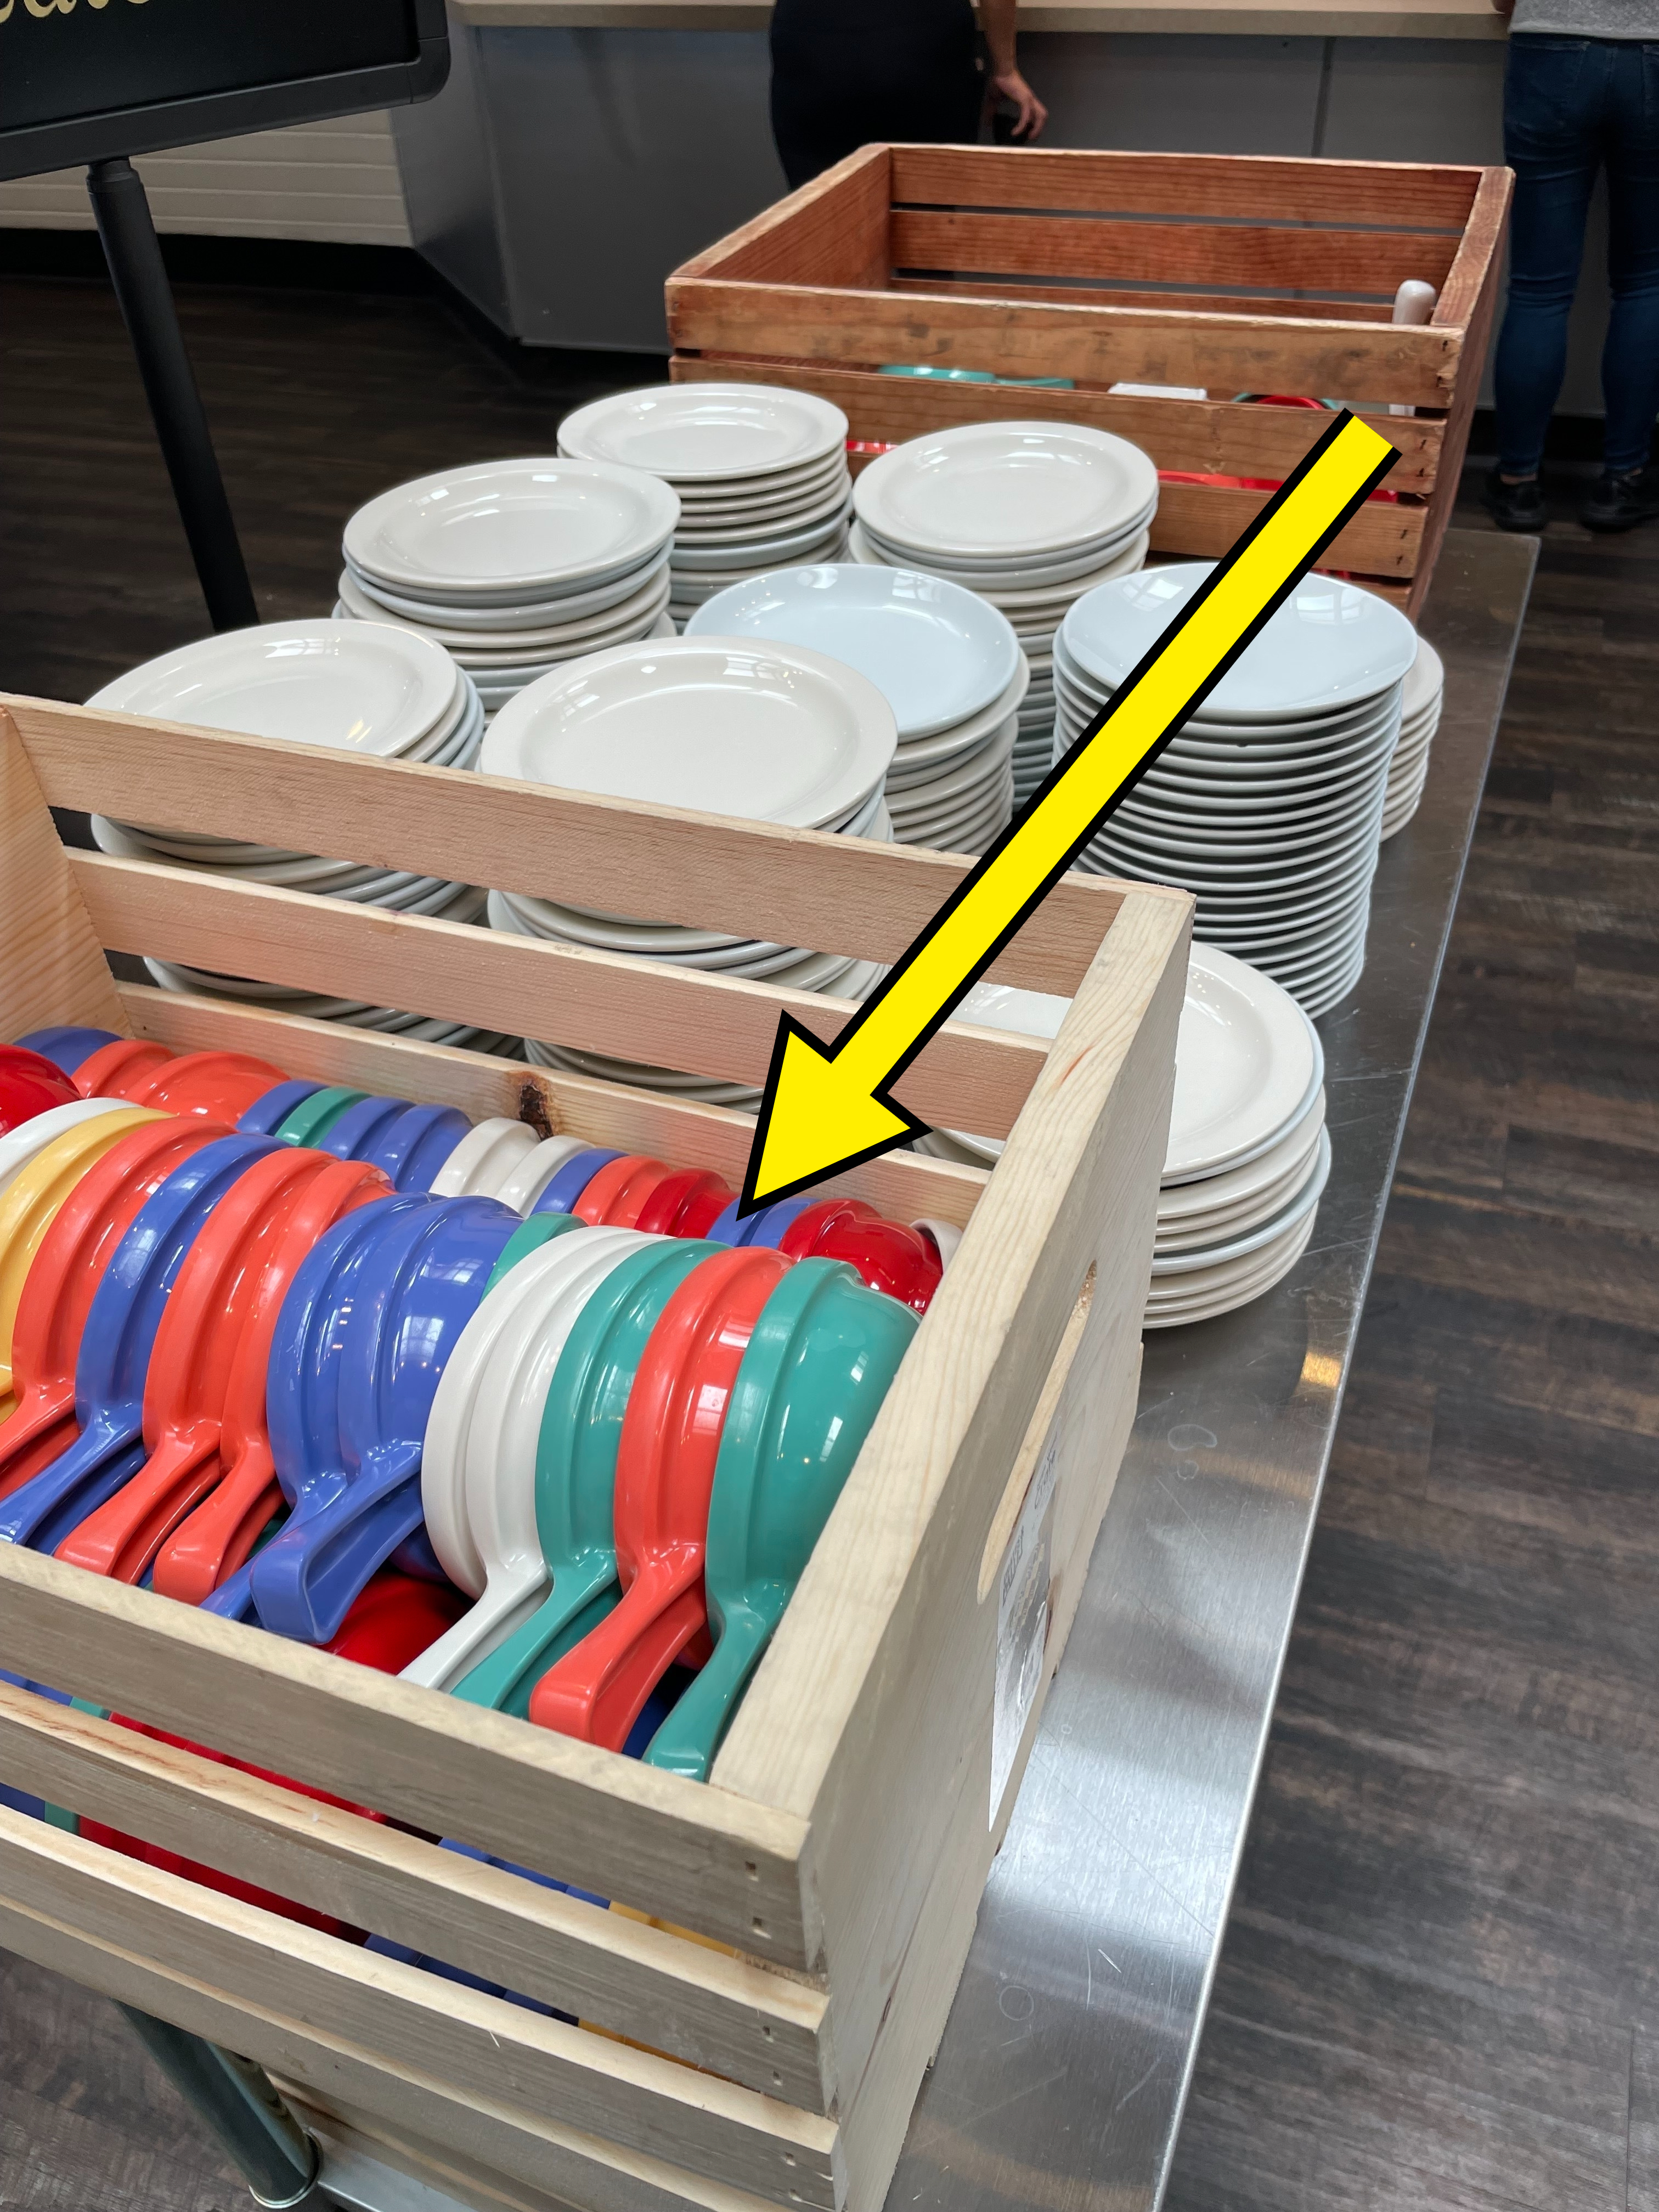 Stacks of white plates and colorful bowls in a wooden cart, ready for serving